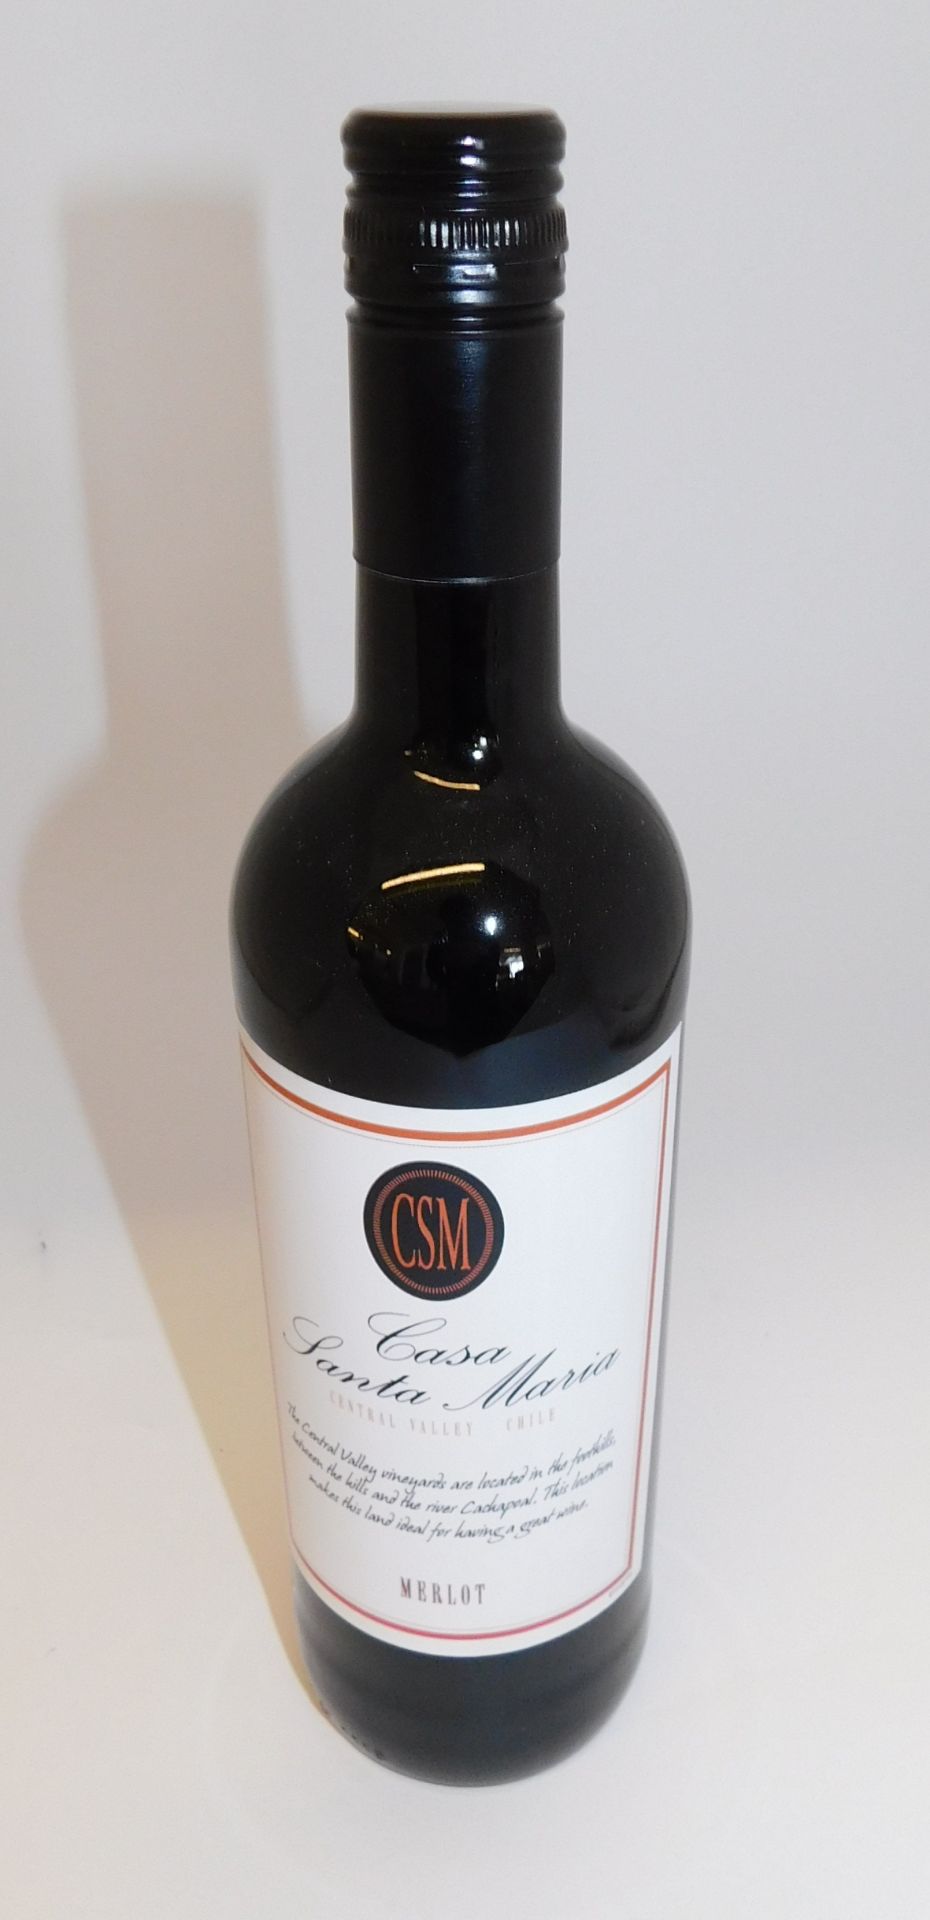 24 Bottles of Casa Santa Maria Merlot, 75cl (Located Stockport – See General Notes for More